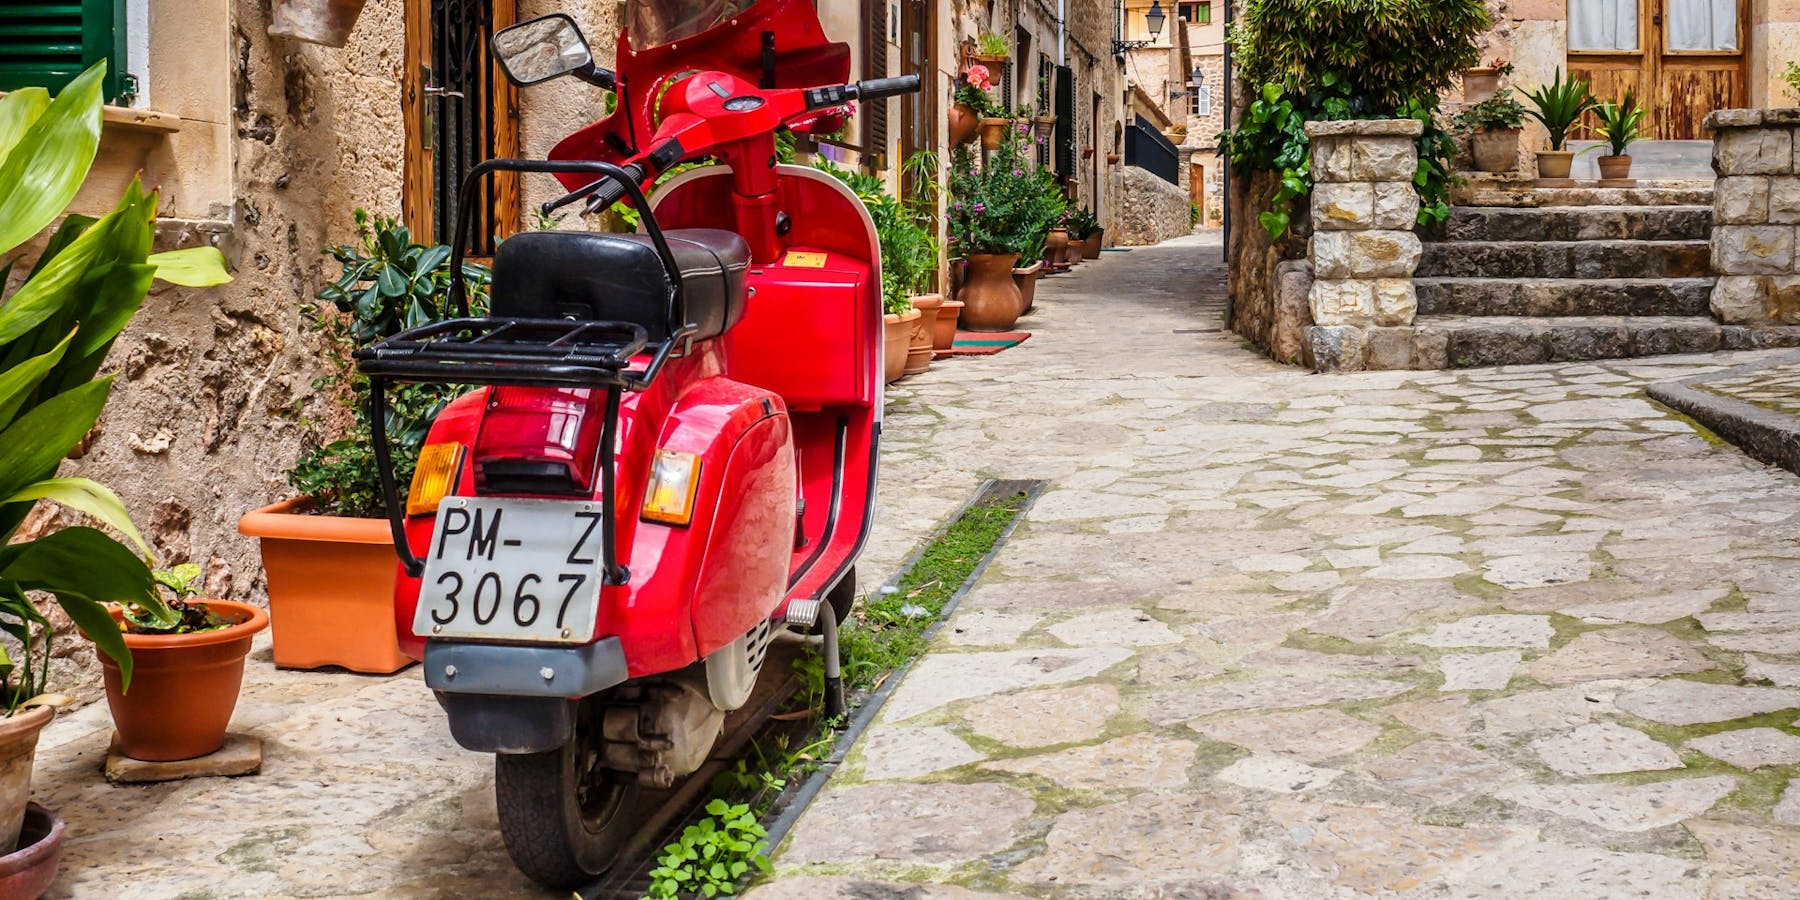 Scooter in the backstreets of Valledemossa, Mallorca, Spain